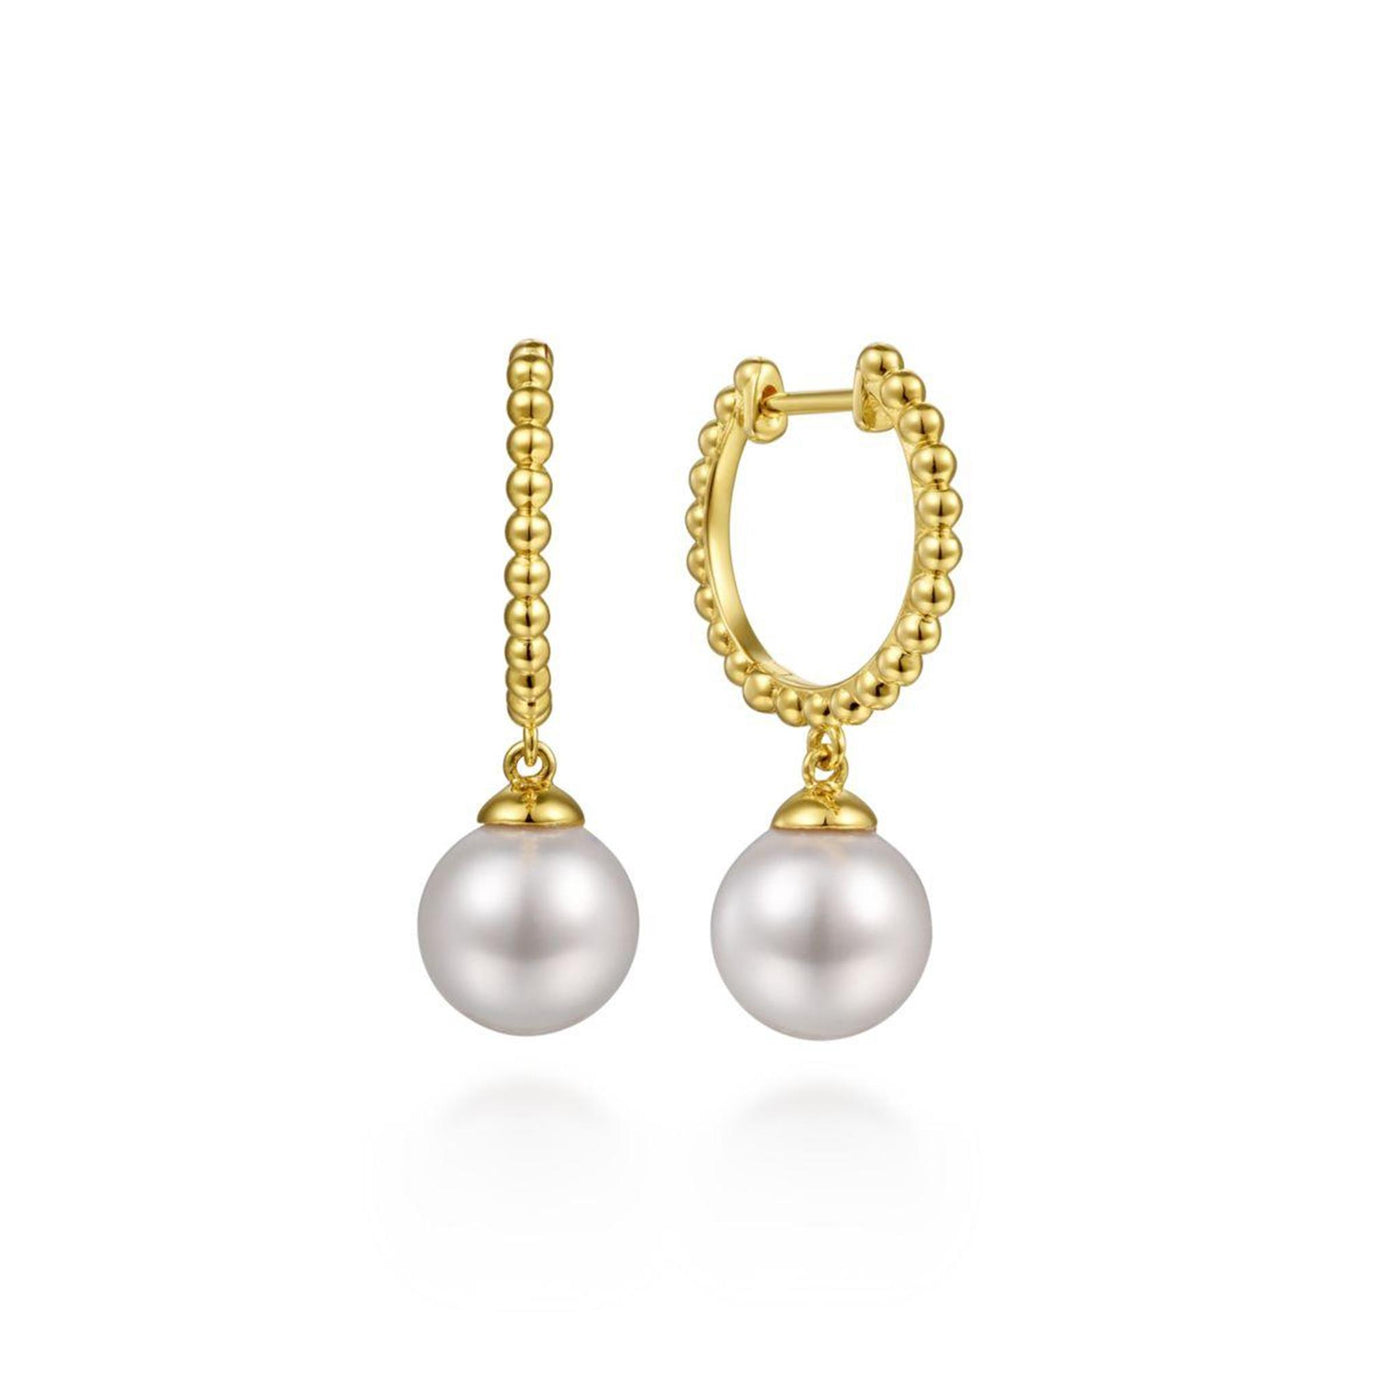 14K Yellow Gold 1.59ctw Huggie Style Earrings Featuring White Cultured Pearls